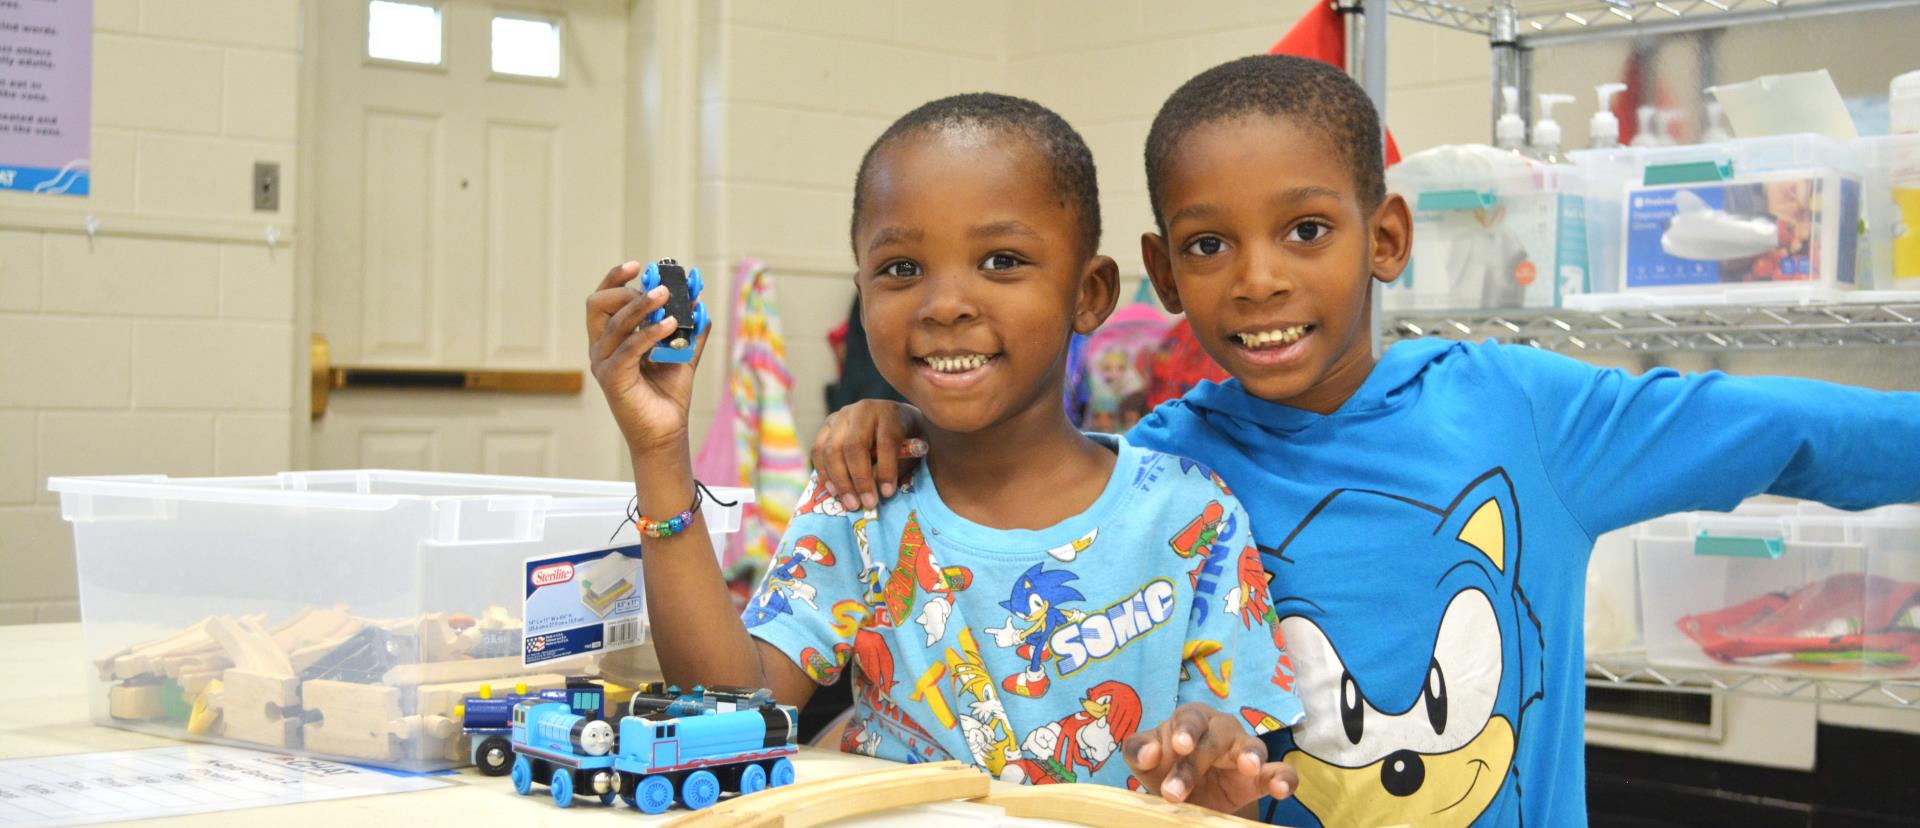 Two boys playing with trains at the Neighborhood Resource Center